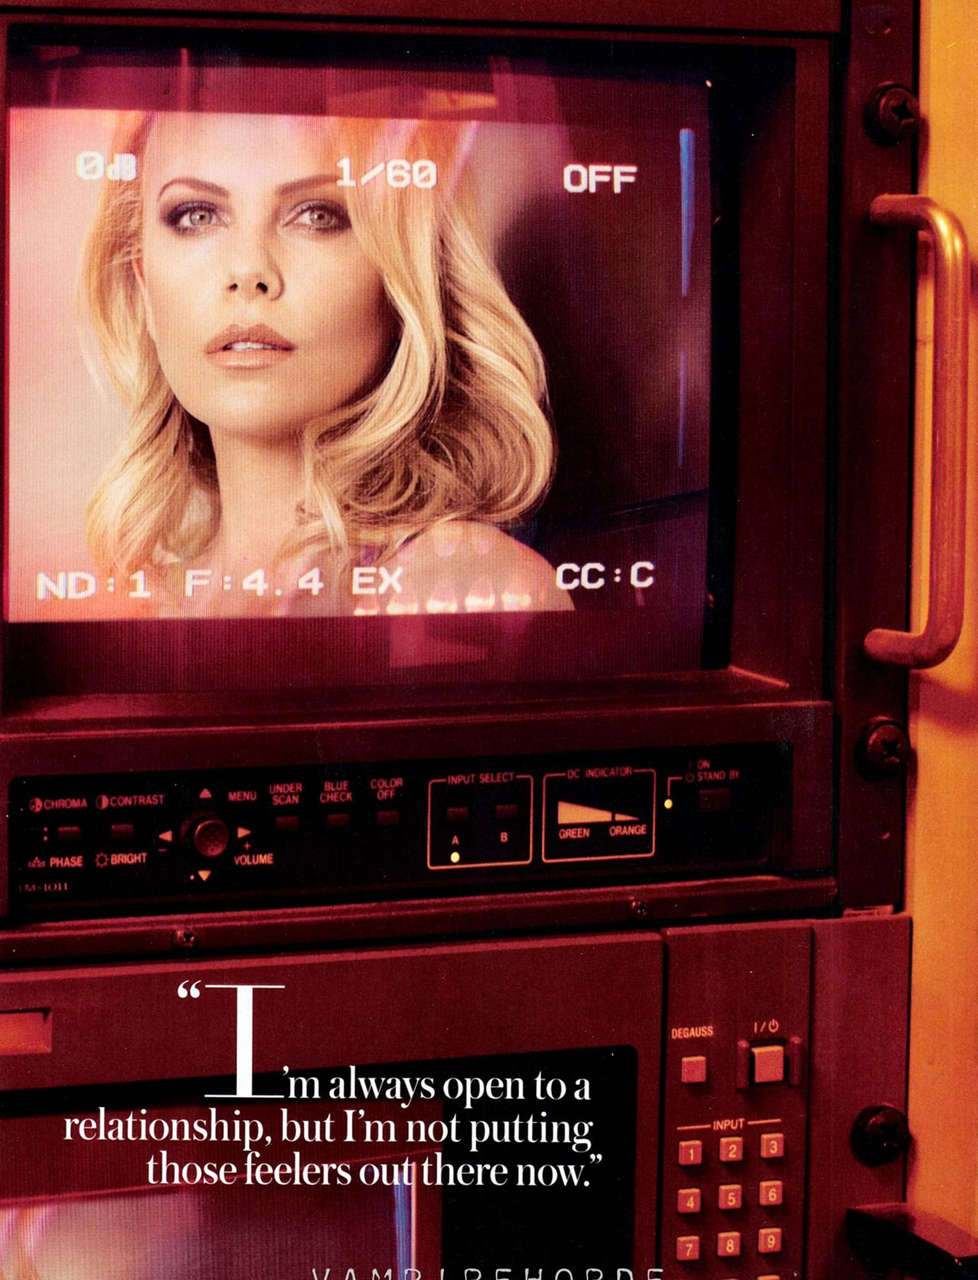 Charlize Theron Instyle Magazine June 2012 Issue